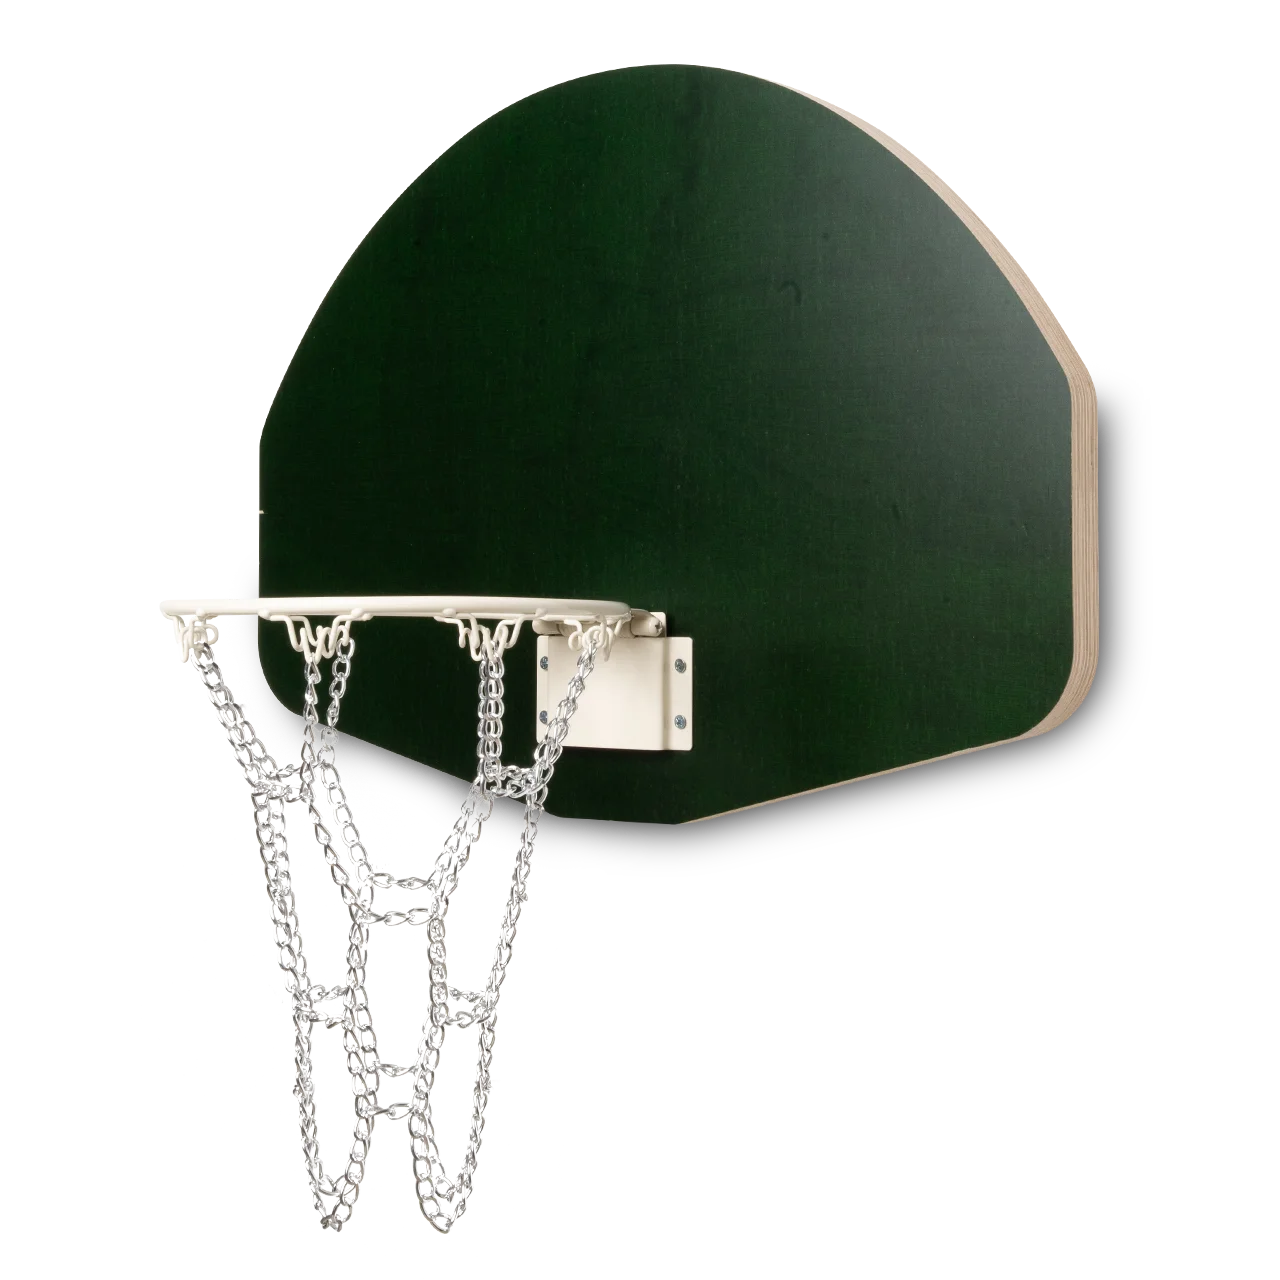 A Wooden Hoop Green with a chain attached.